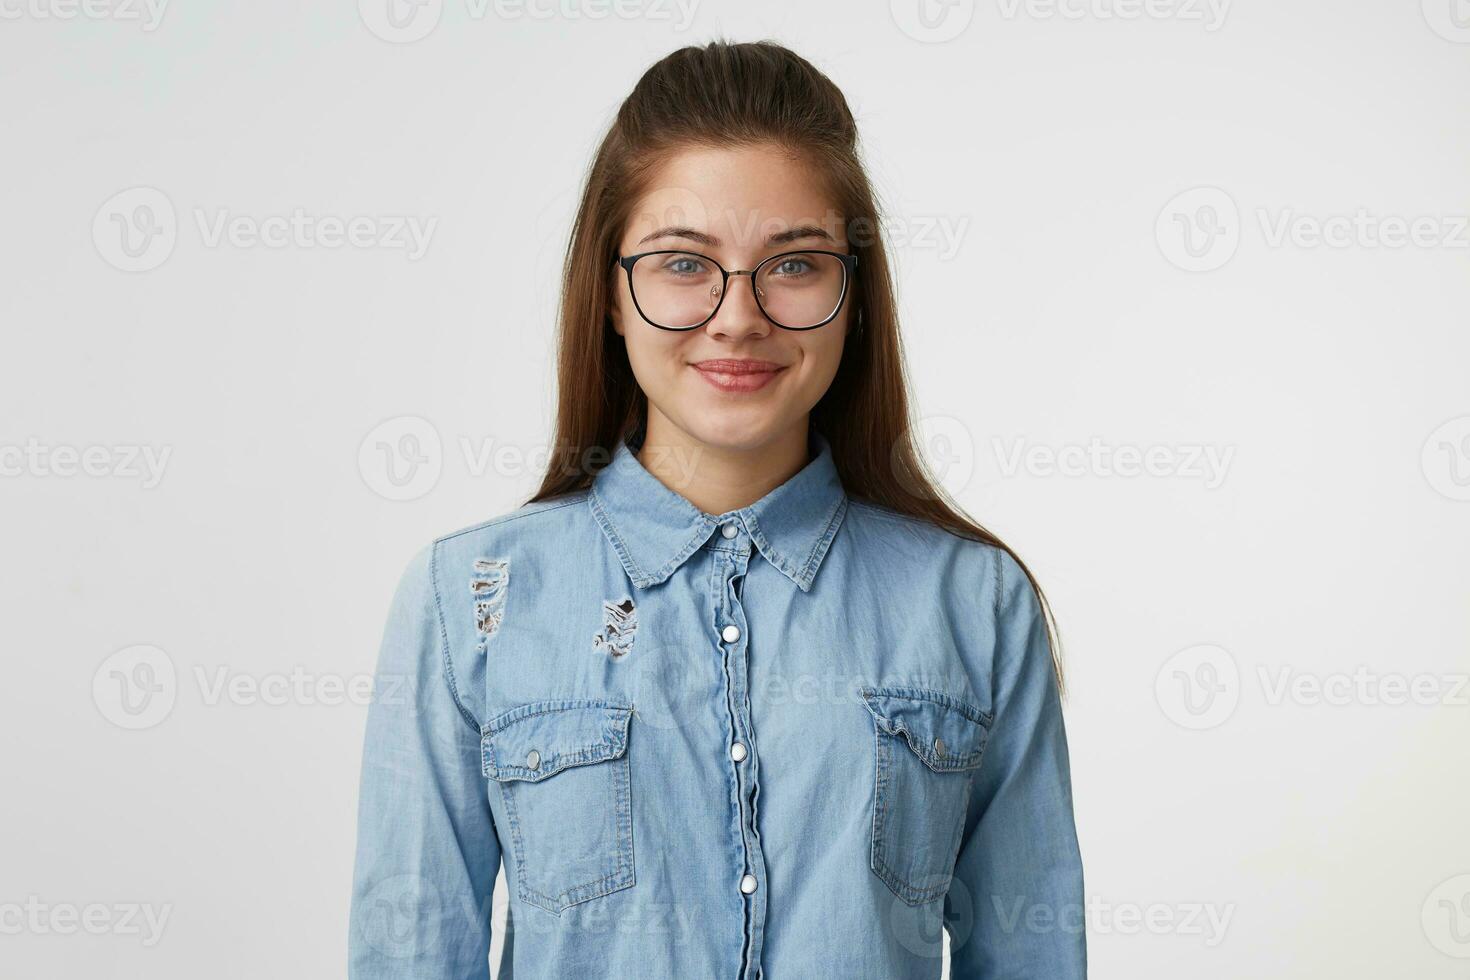 Contented young girl friendly smiling looking at the camera dressed stylish denim shirt, glasses, isolated on white background. photo